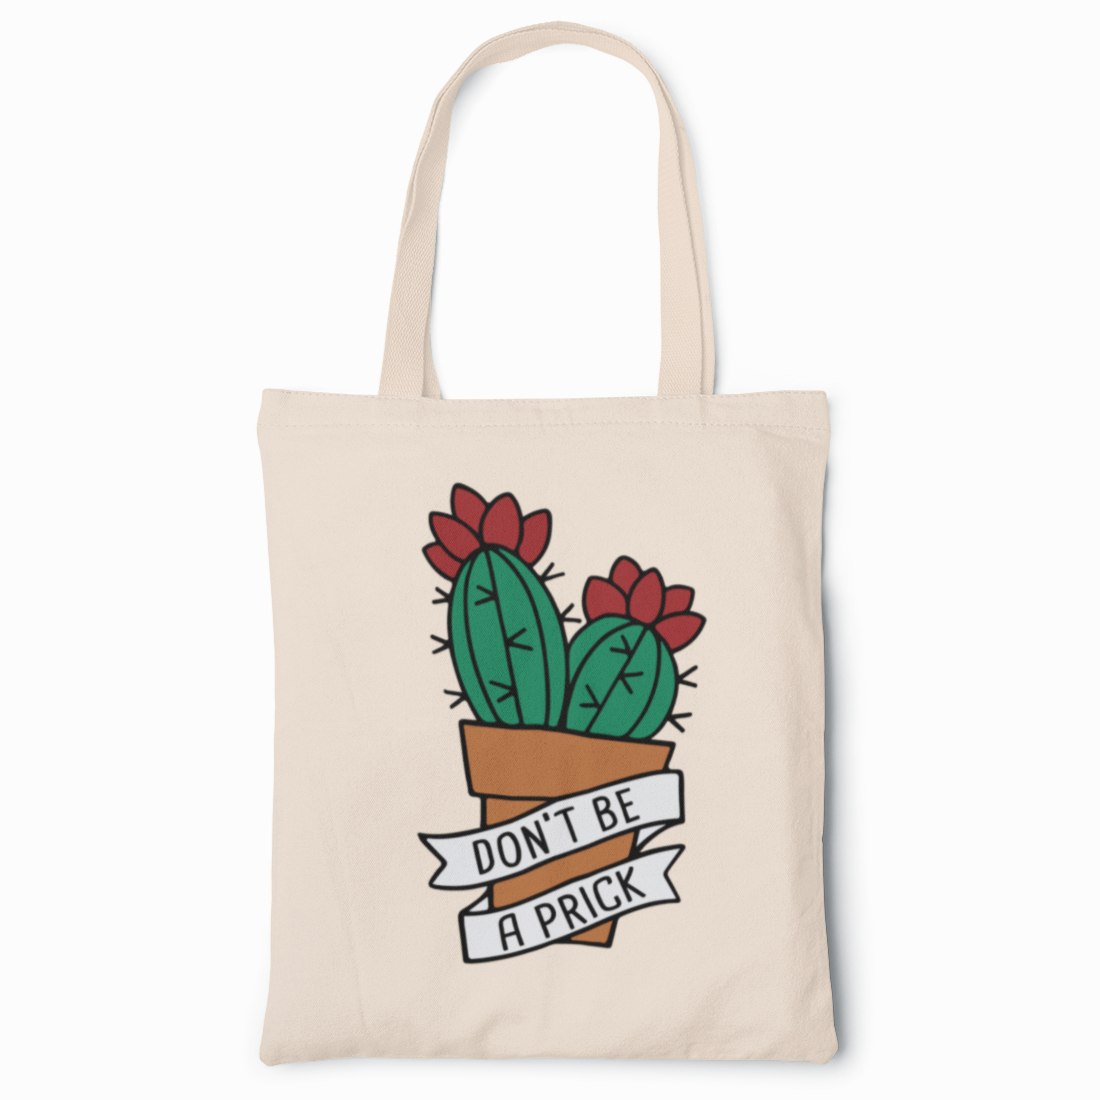 Funny Green cactus in brown flower pot tote bag with the text 'don't be a prick'